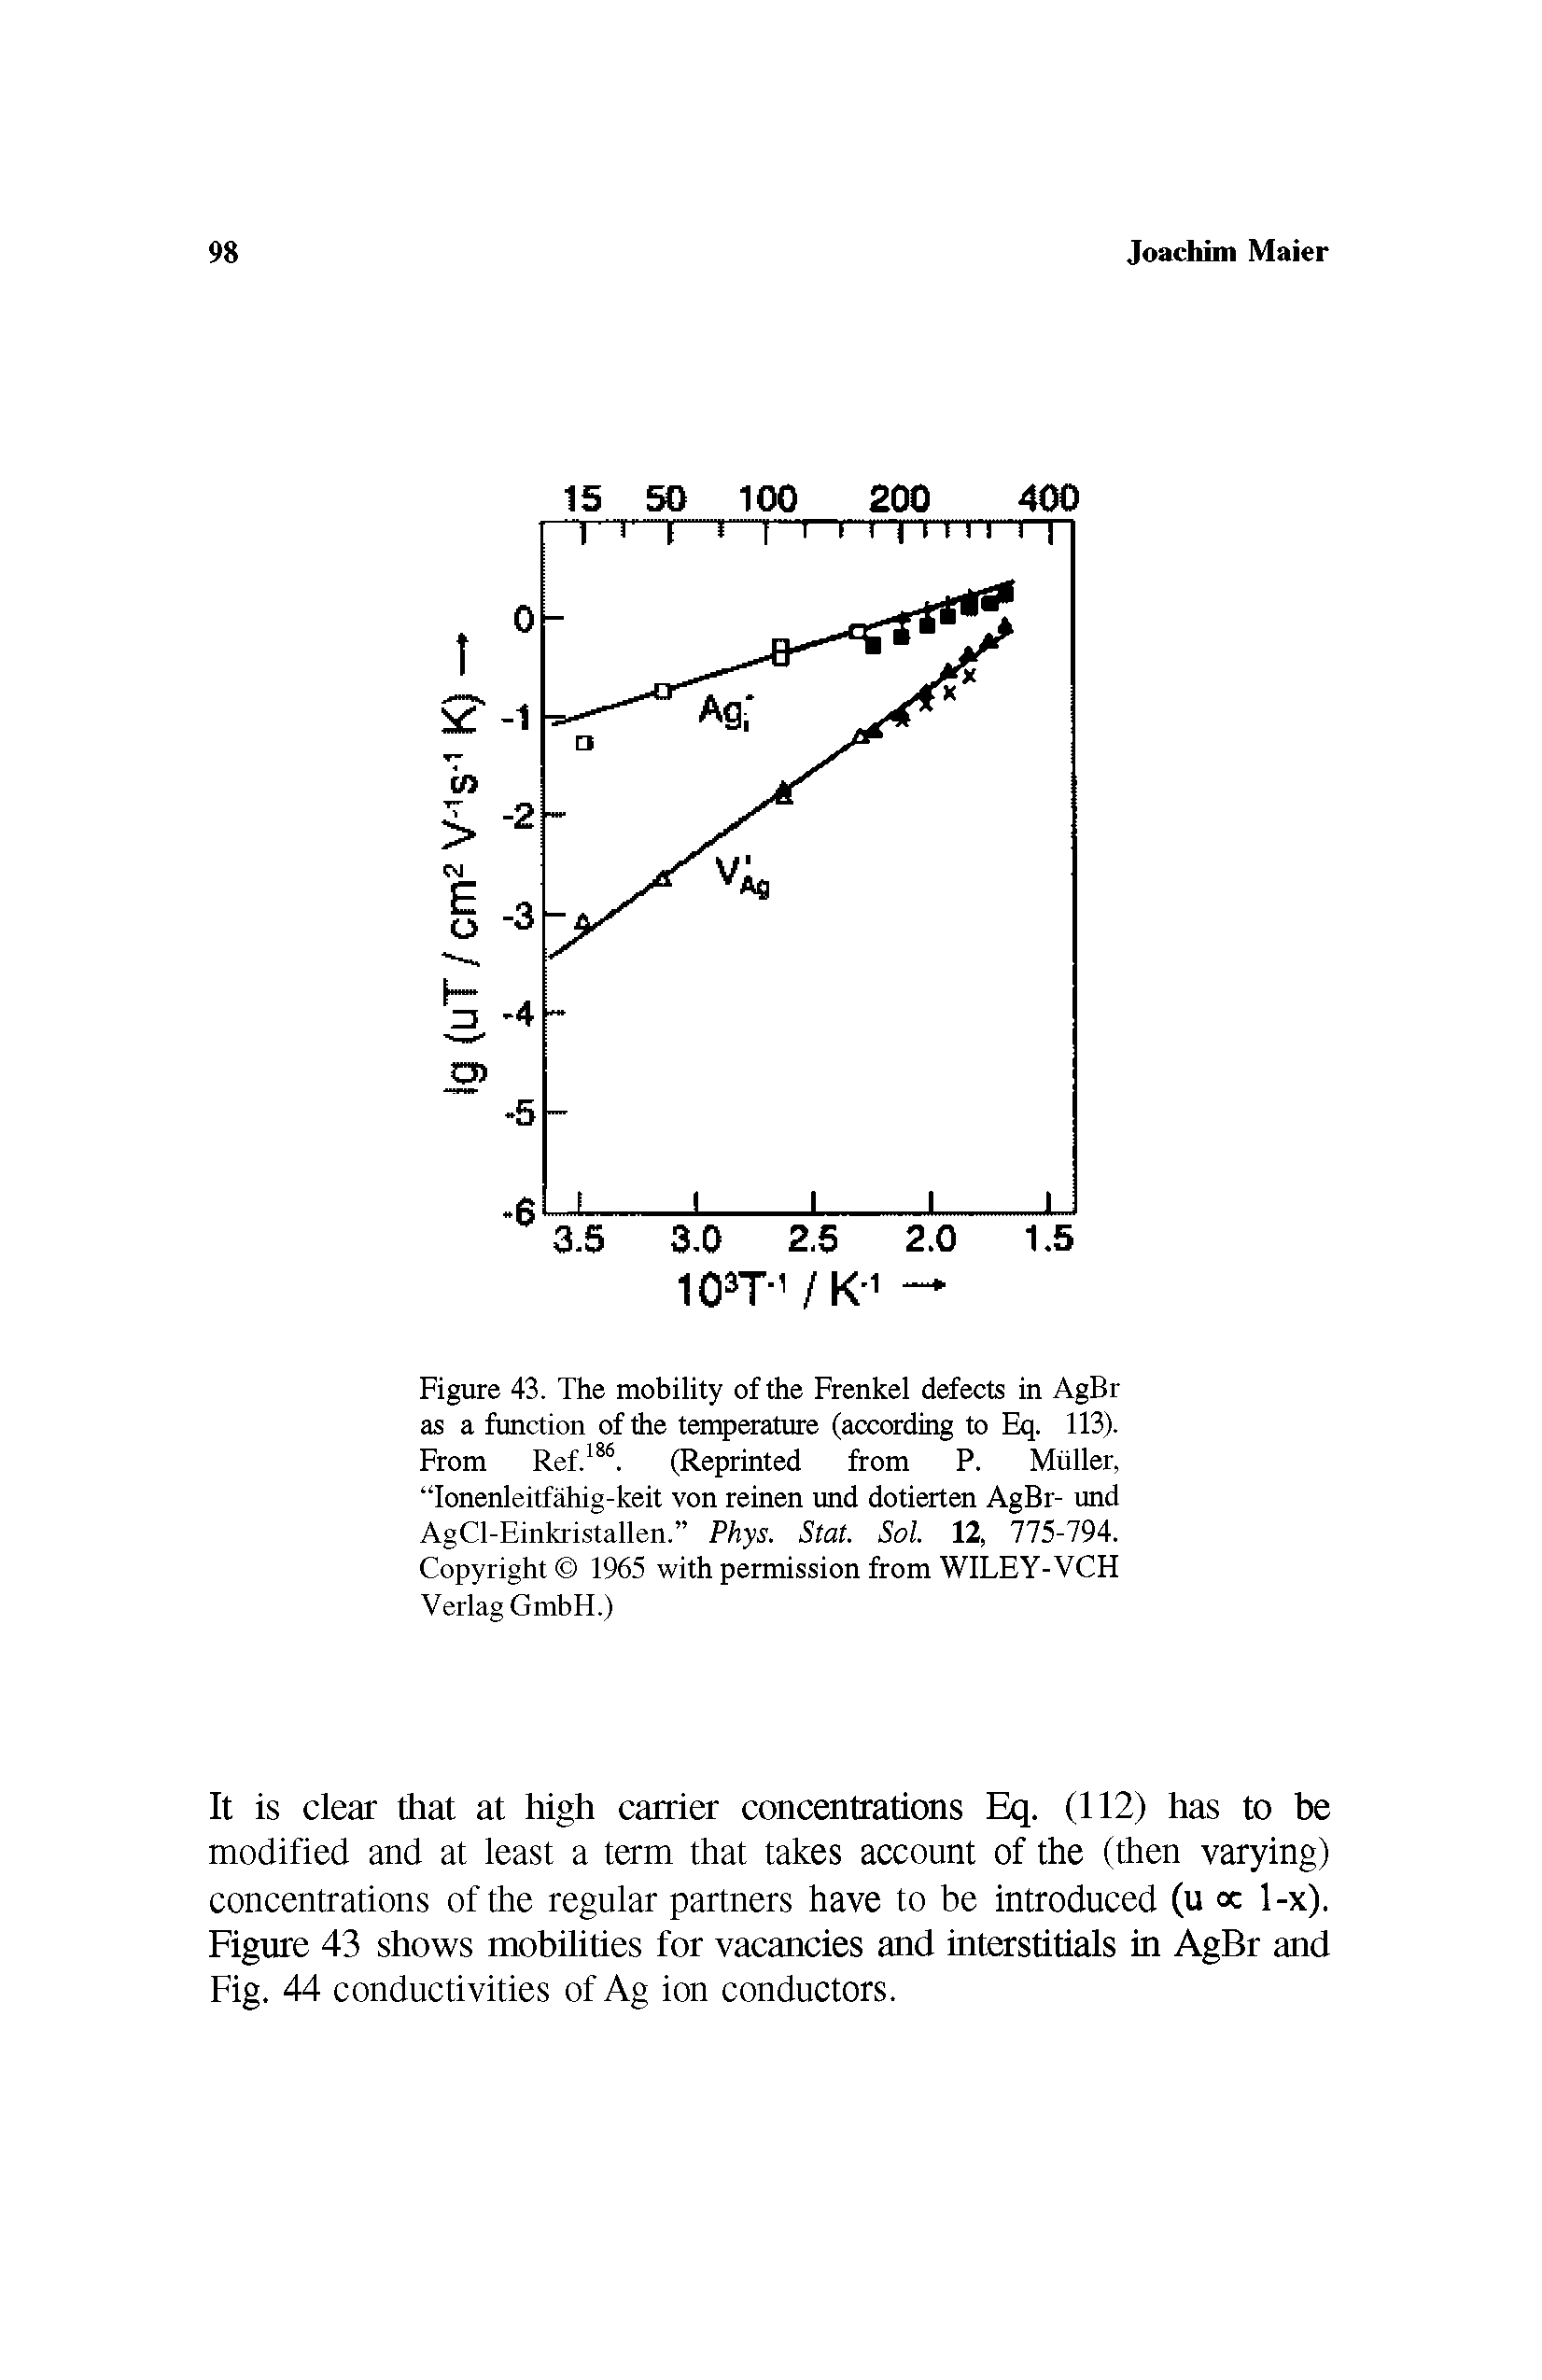 Figure 43. The mobility of the Frenkel defects in AgBr as a function of the temperature (according to Eq. 113). From Ref.186. (Reprinted from P. Muller, Ionenleitfahig-keit von reinen und dotierten AgBr- und AgCl-Einkristallen. Phys. Stat. Sol. 12, 775-794. Copyright 1965 with permission from WILEY-VCH Verlag GmbH.)...